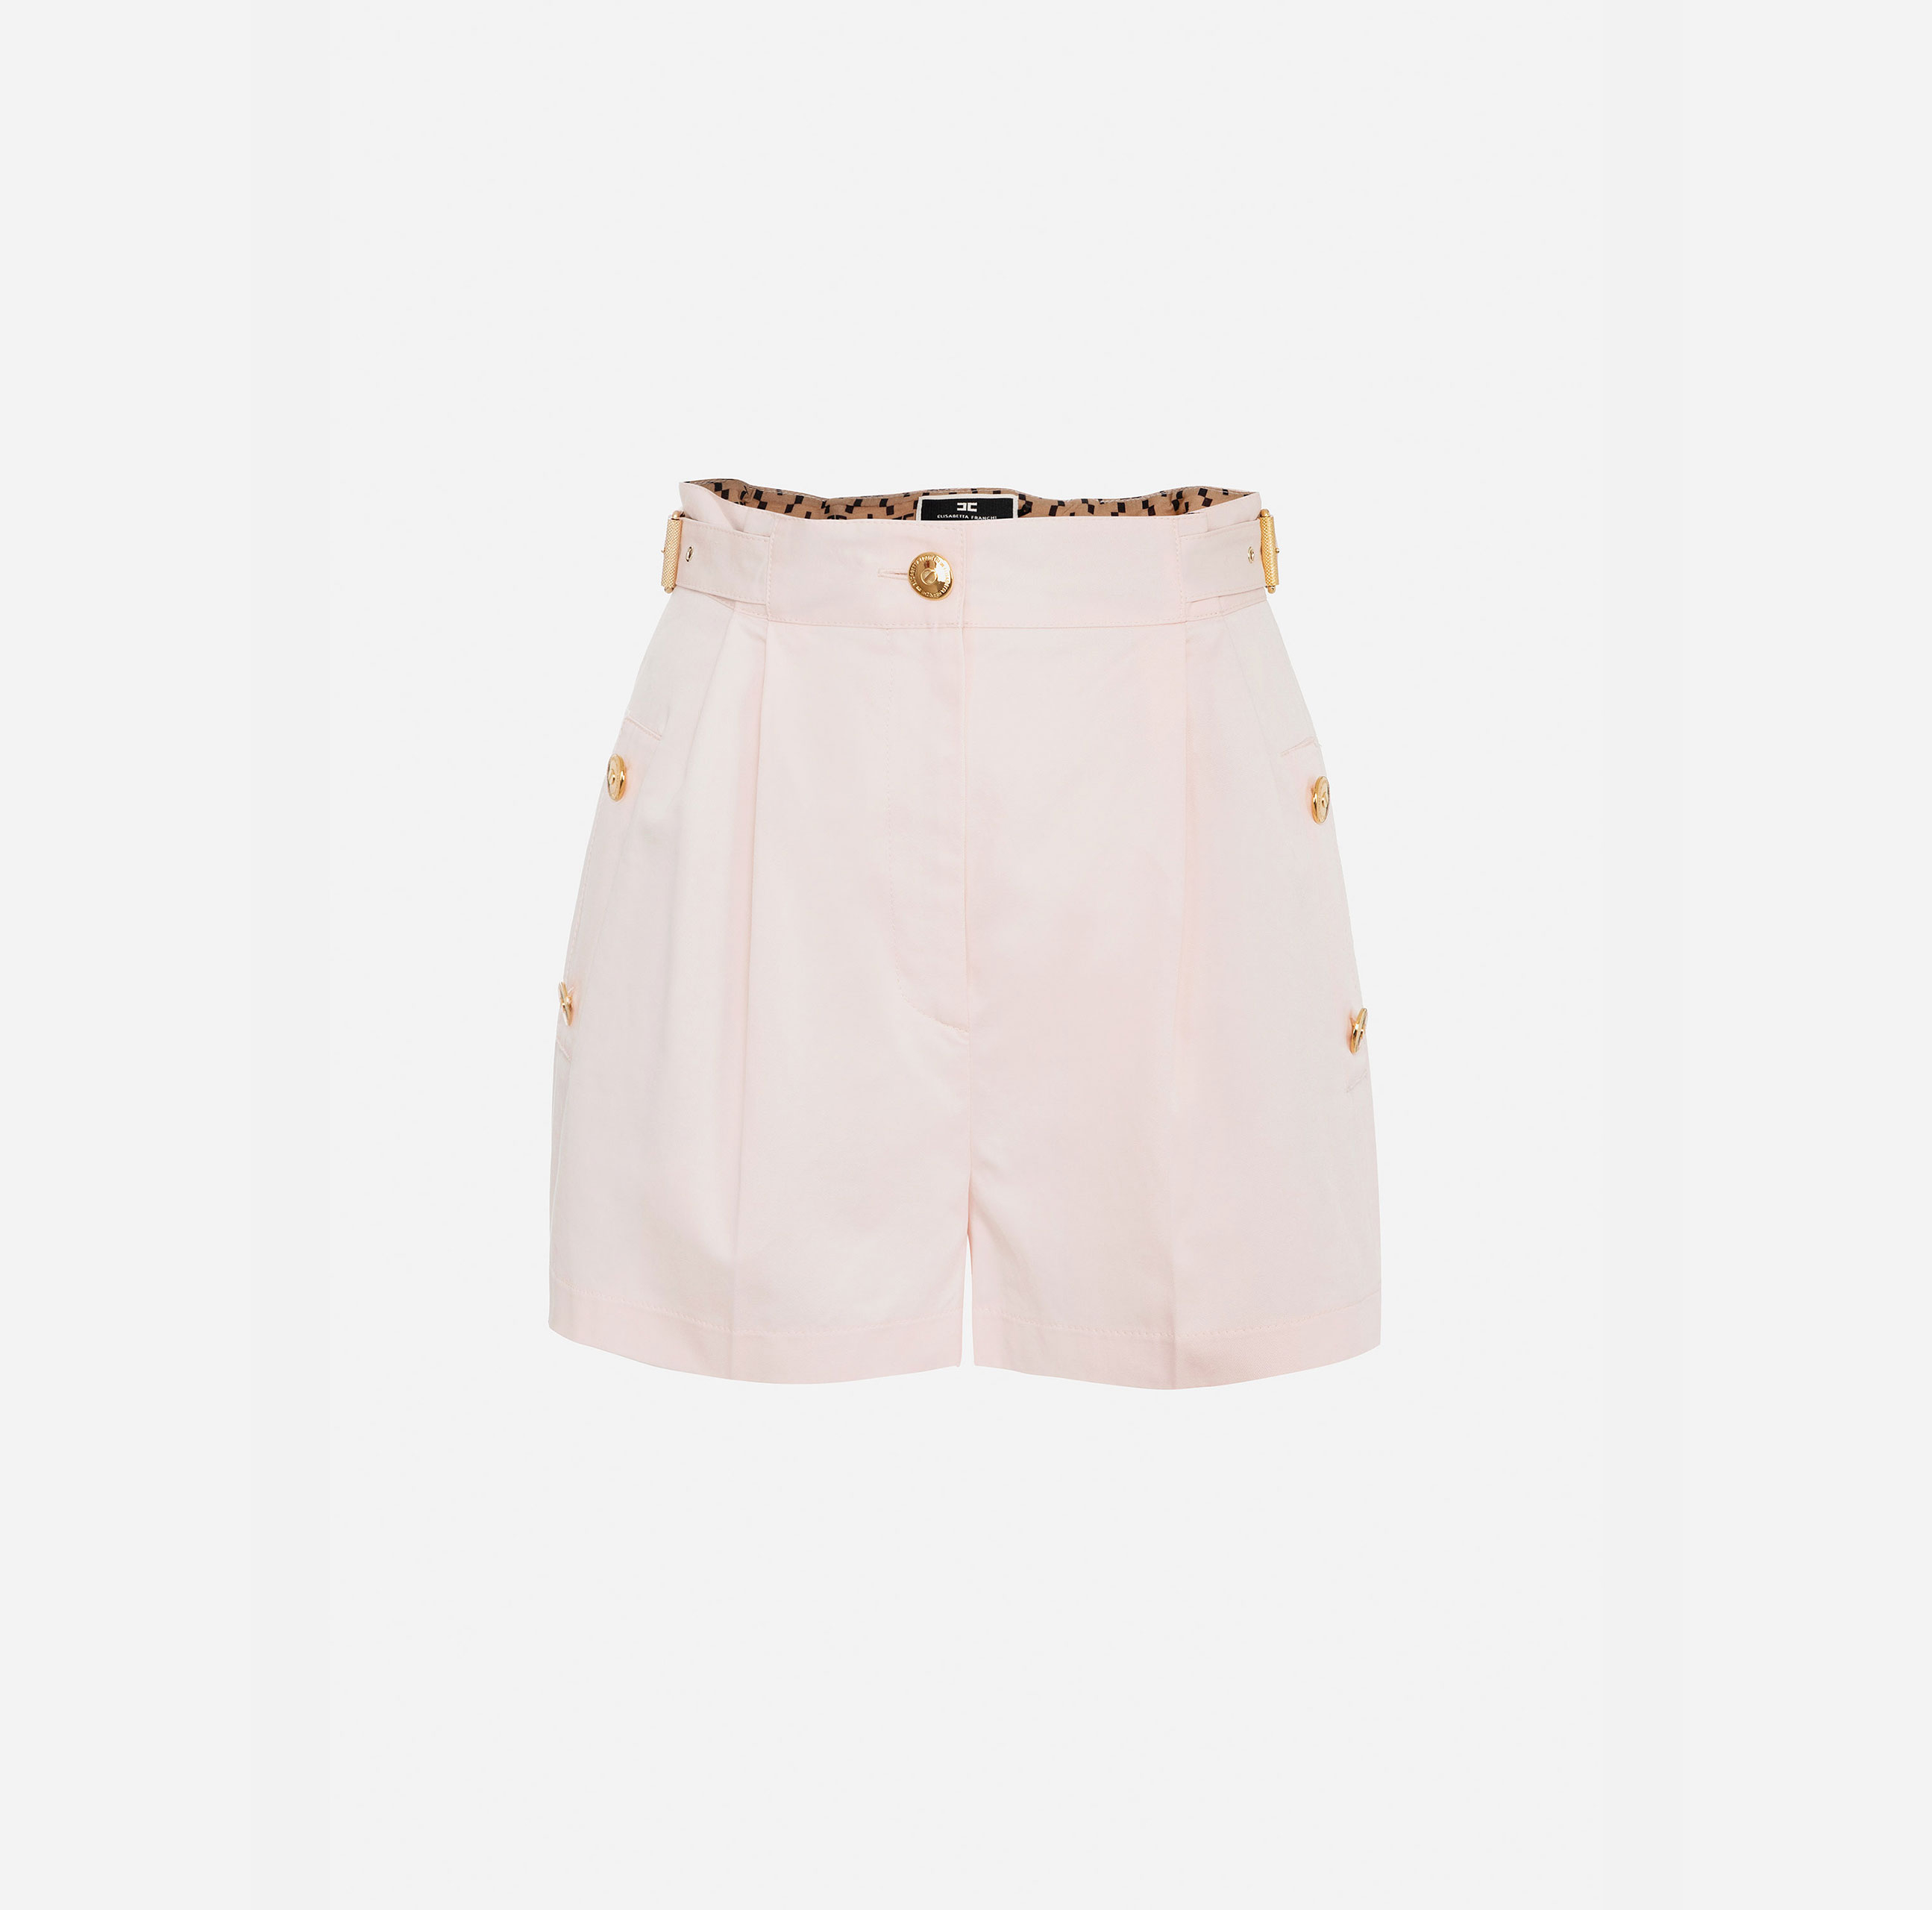 Shorts with waistband and two golden metal buckles - ABBIGLIAMENTO - Elisabetta Franchi